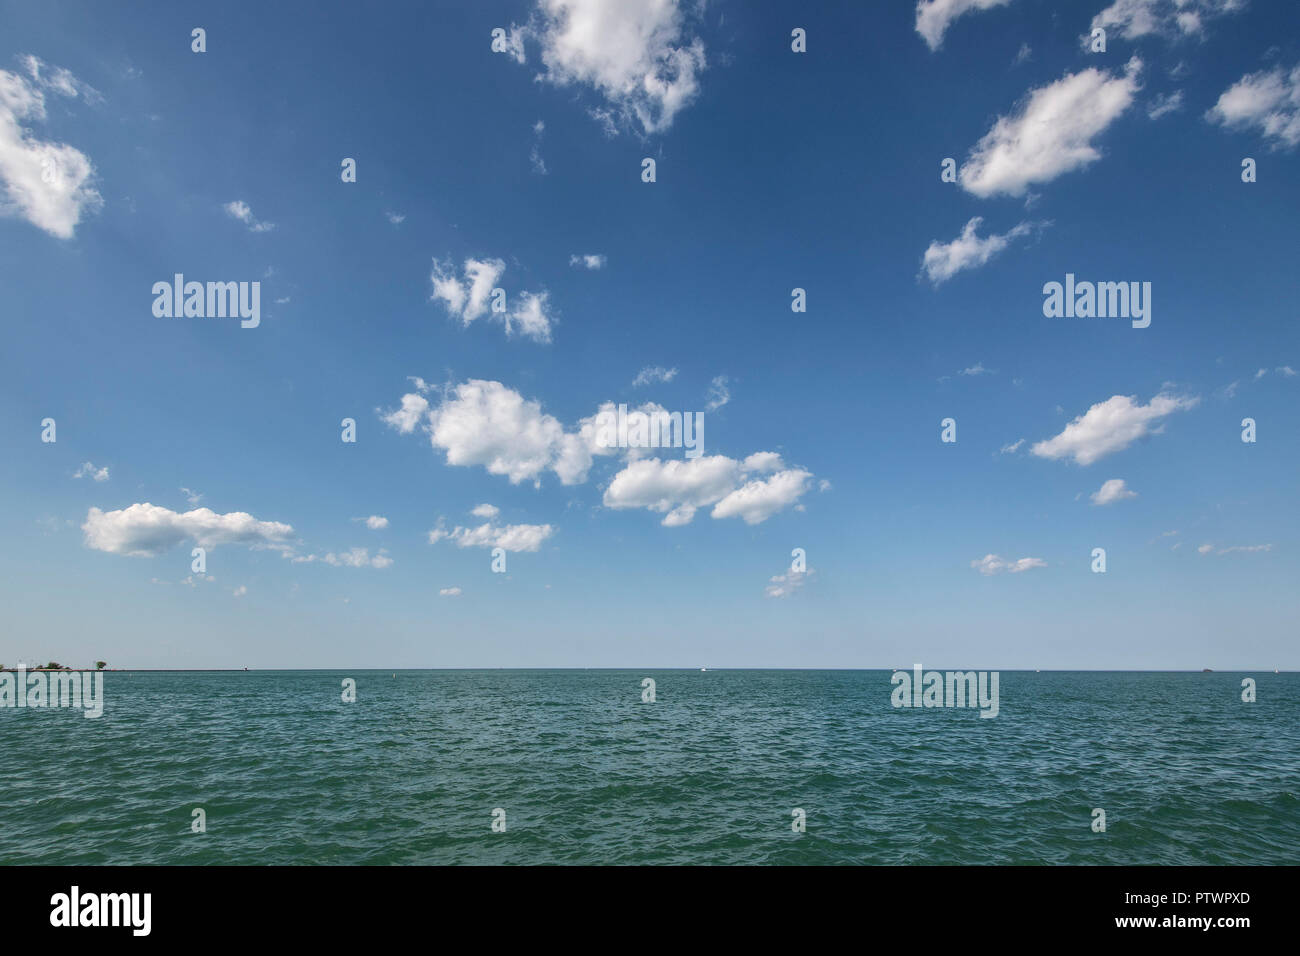 Water with blue sky and small clouds, Lake Michigan, Chicago, Illinois, USA Stock Photo